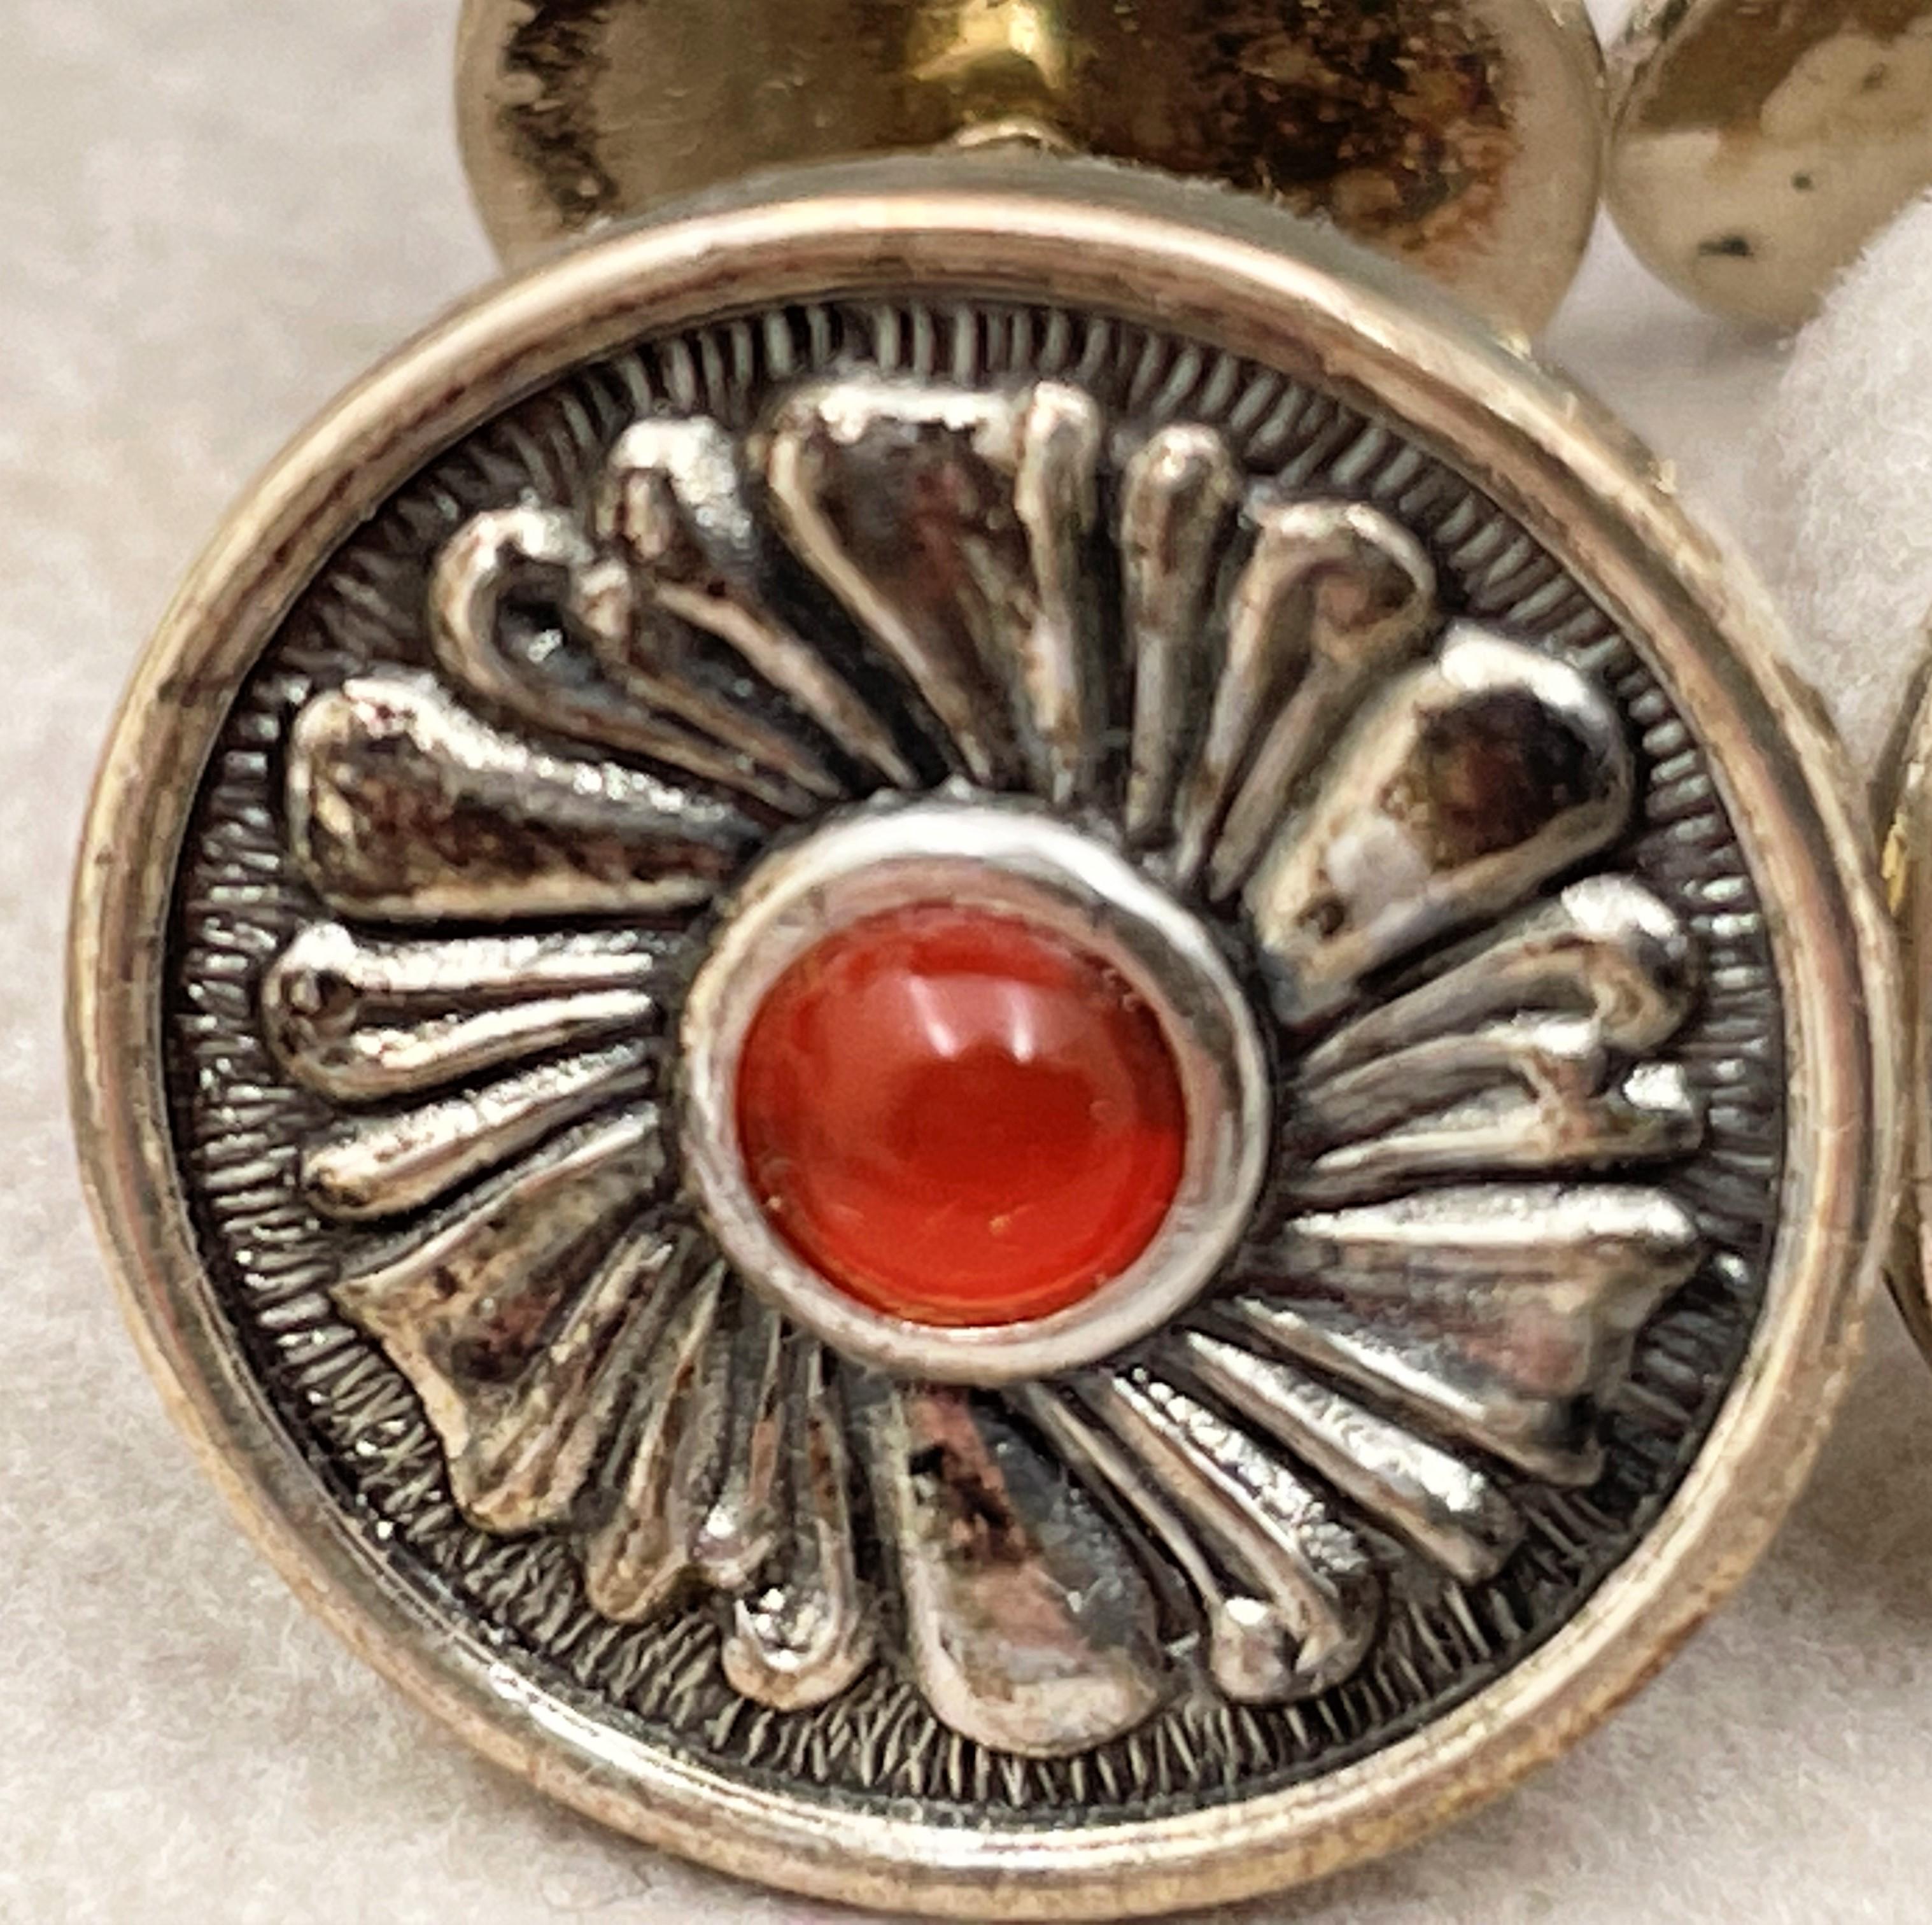 Gianmaria Buccellati, Italian, pair of sterling silver cufflinks, with a red stone at the center, in a beautiful floral motif, measuring 2/3'' in diameter, and bearing hallmarks. Sold in its original box, never used.

Mario Buccellati, the founder